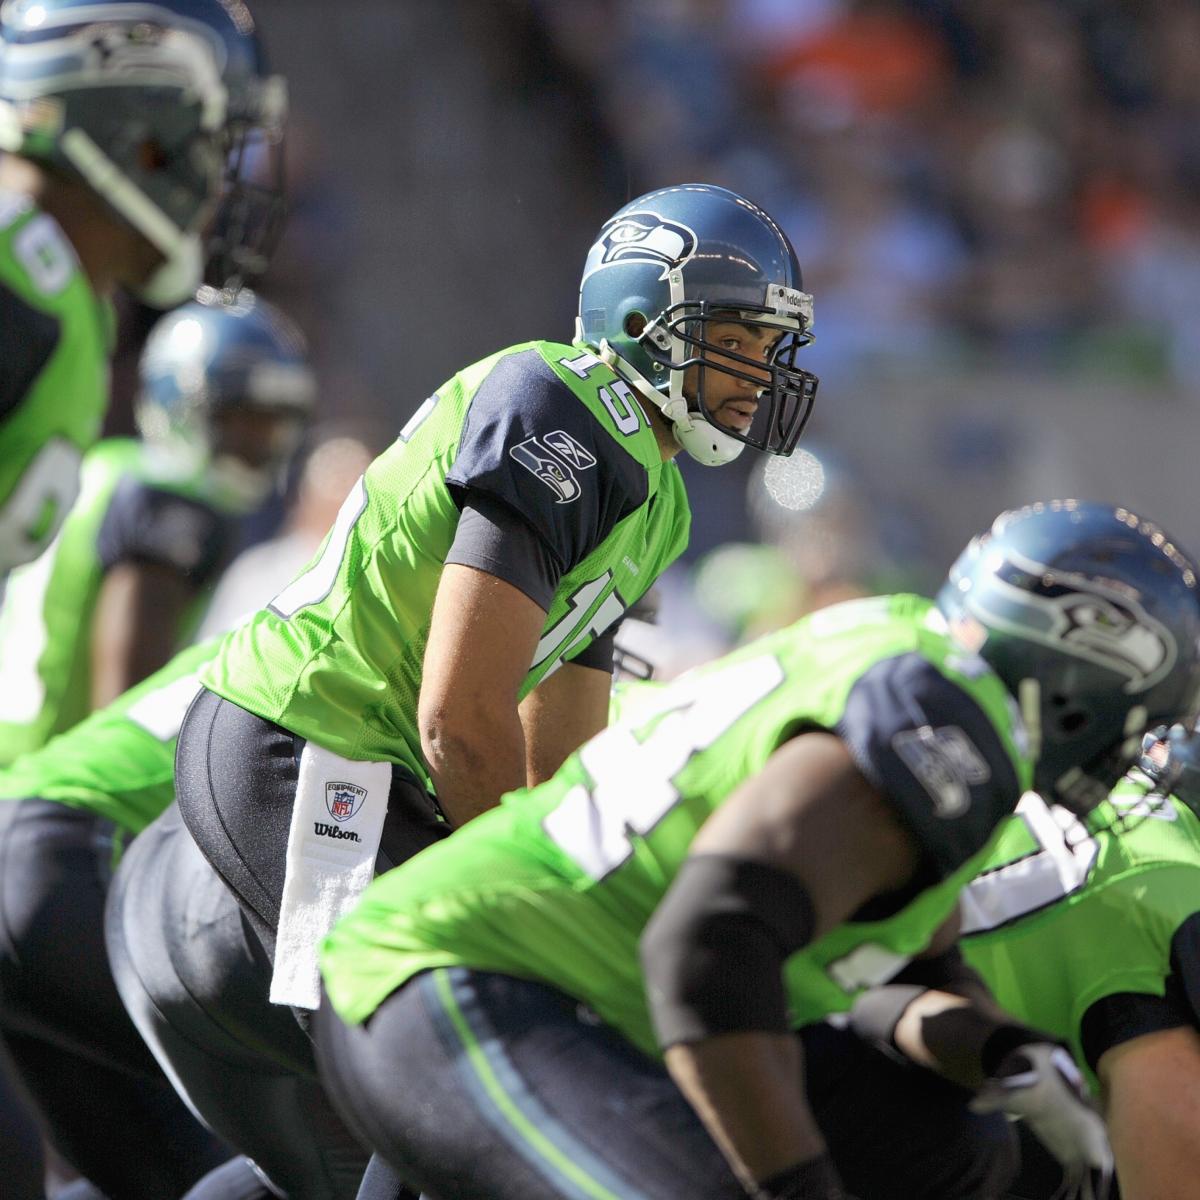 Seattle Seahawks Will New Uniforms Delight, Distract, or Disgust